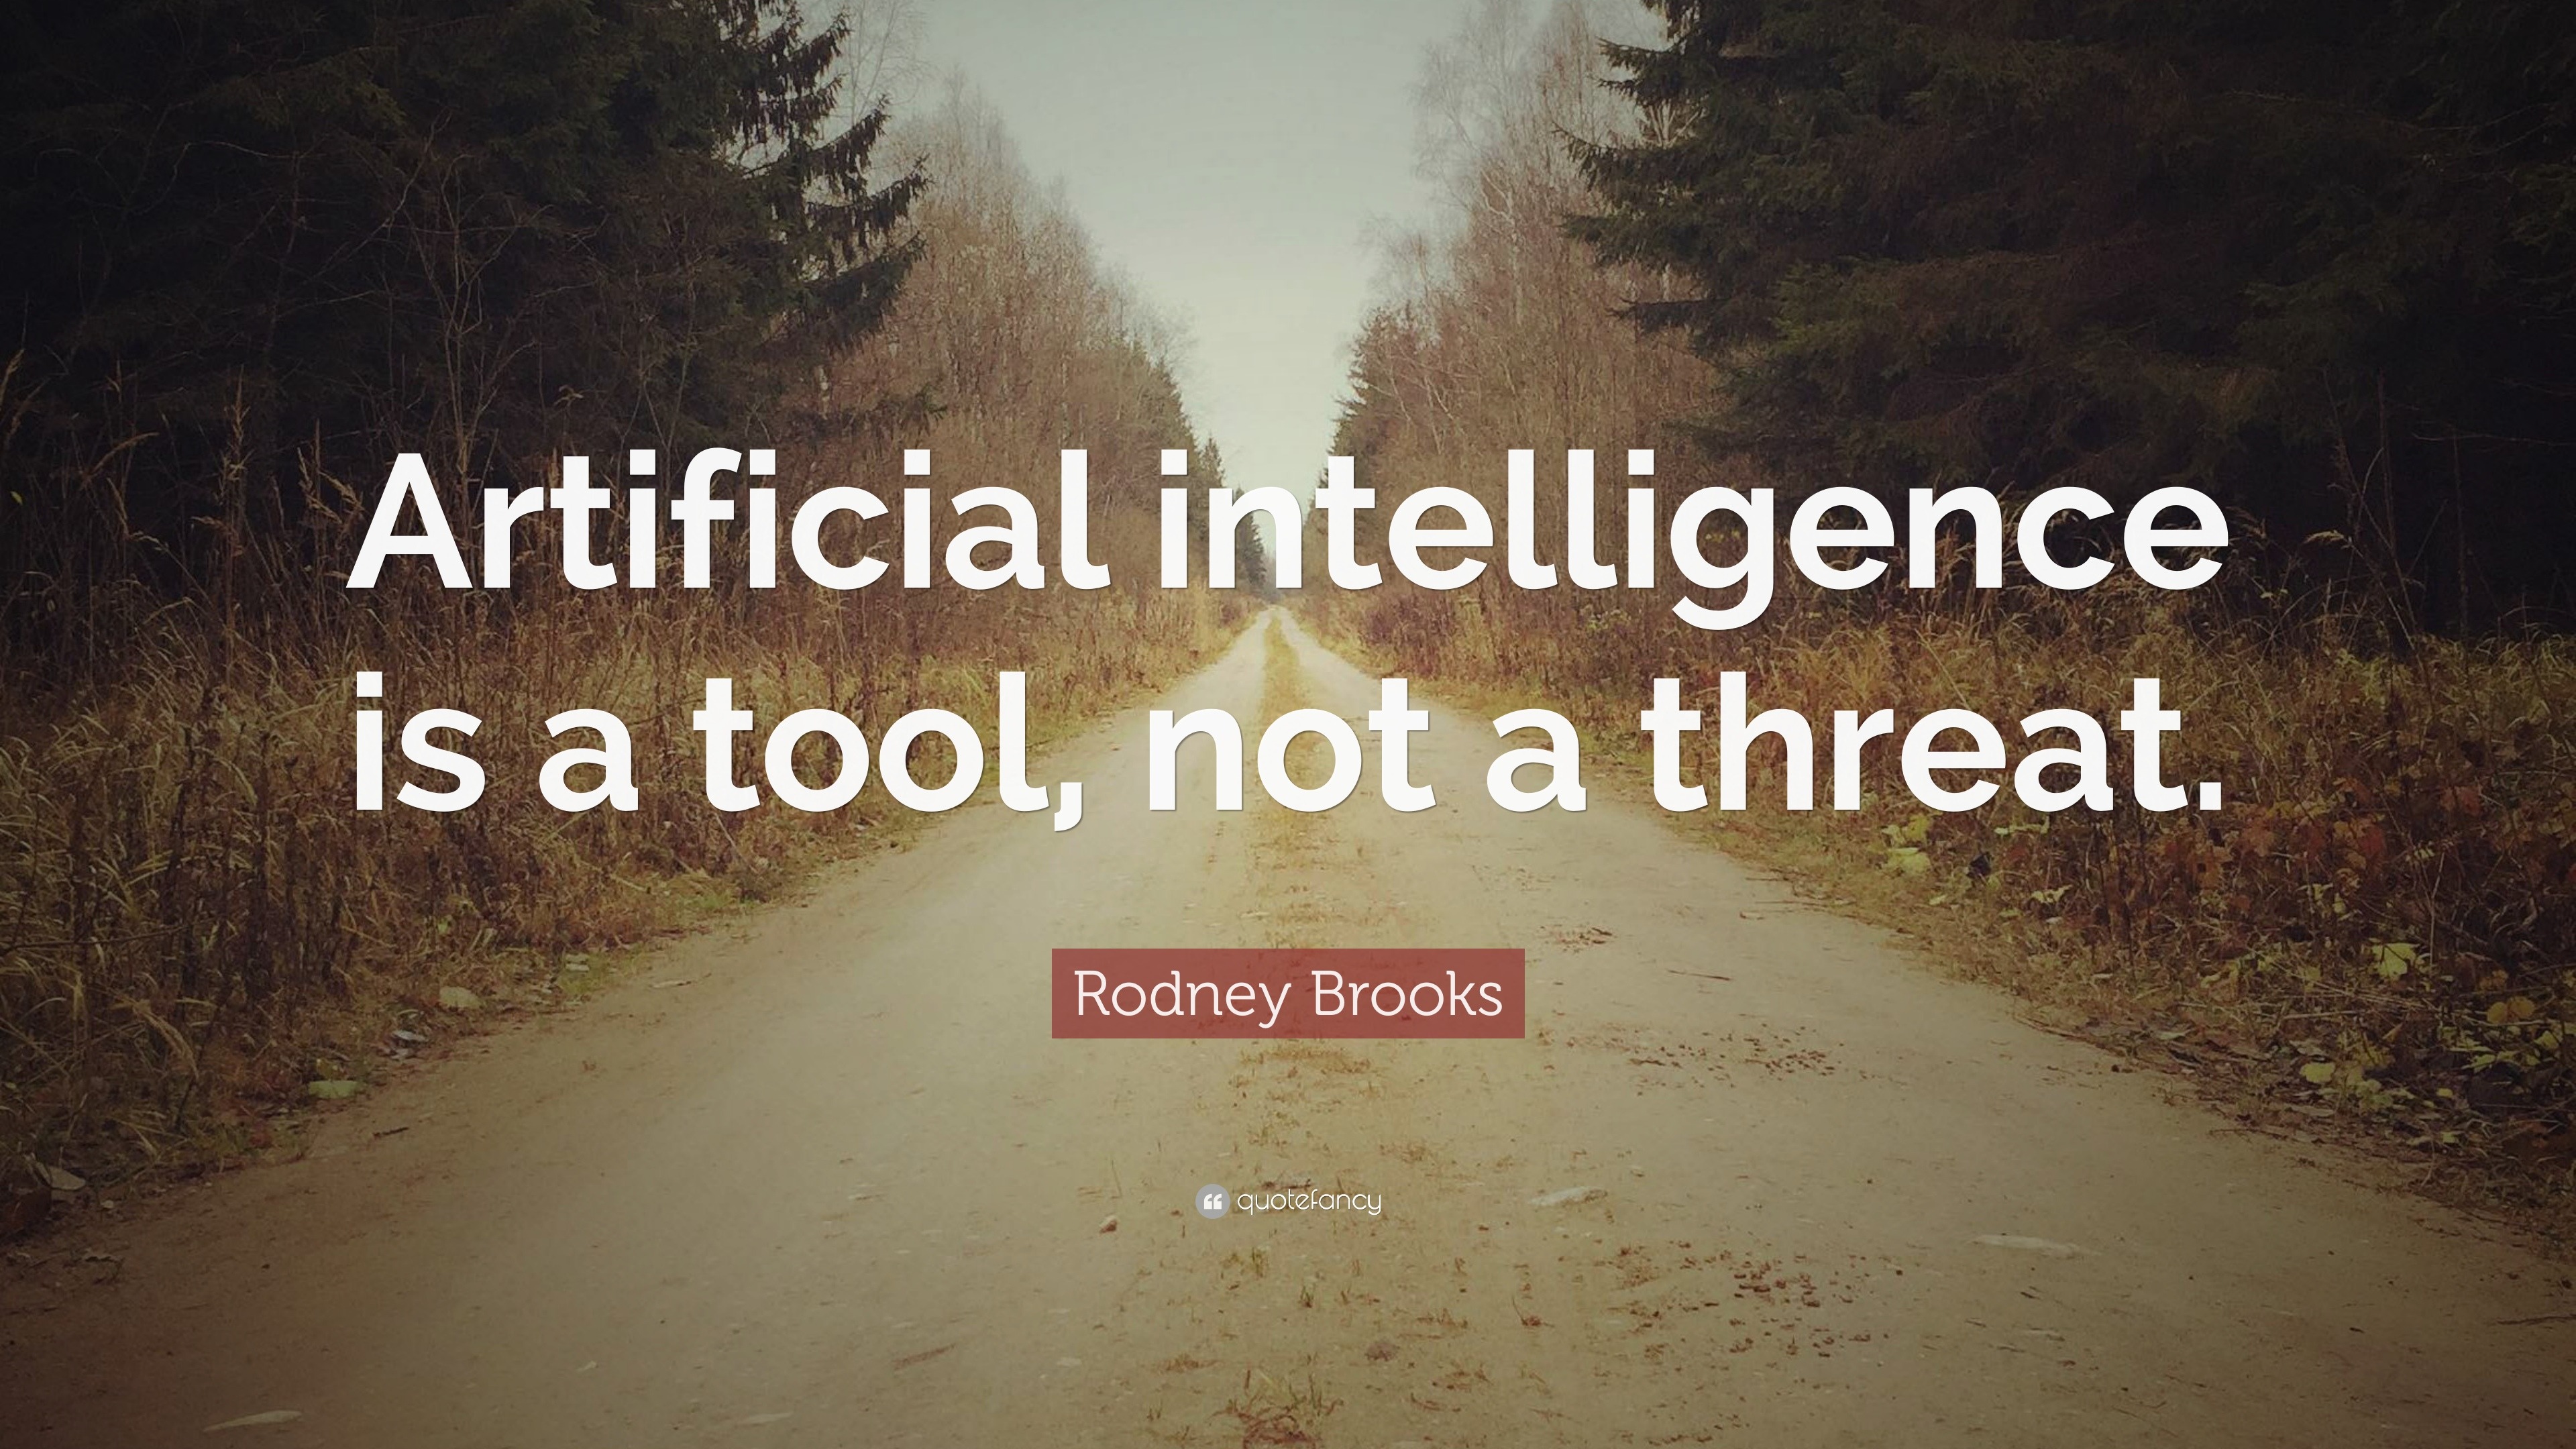 Rodney Brooks Quote: “Artificial intelligence is a tool, not a threat.”